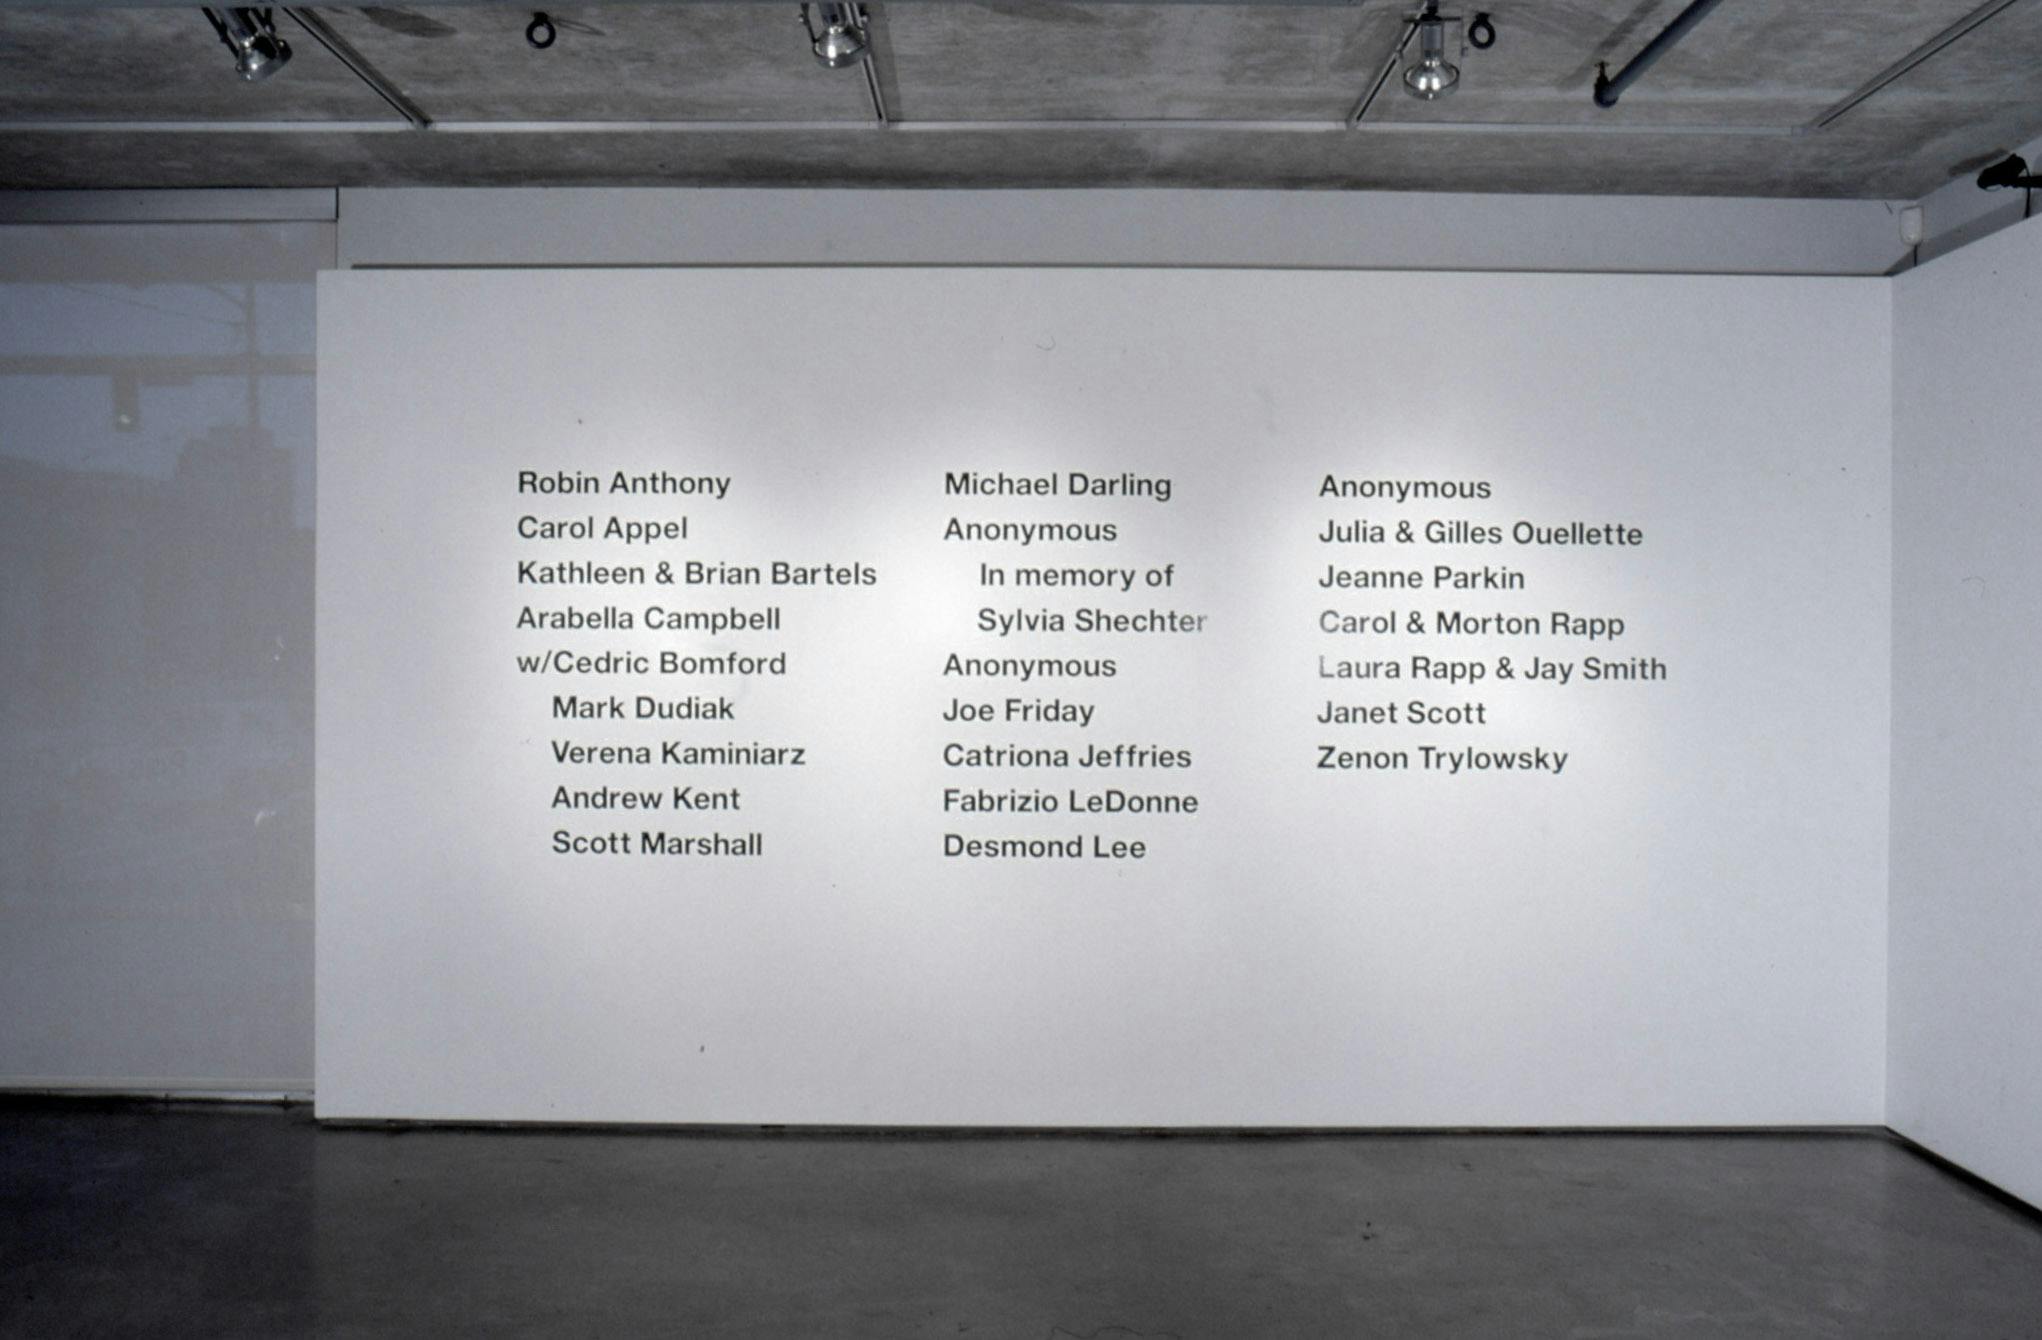 This is an installation shot of a gallery space. On a white wall, names of people are printed in a large black font. There are two listed as “Anonymous” in this list of names. 